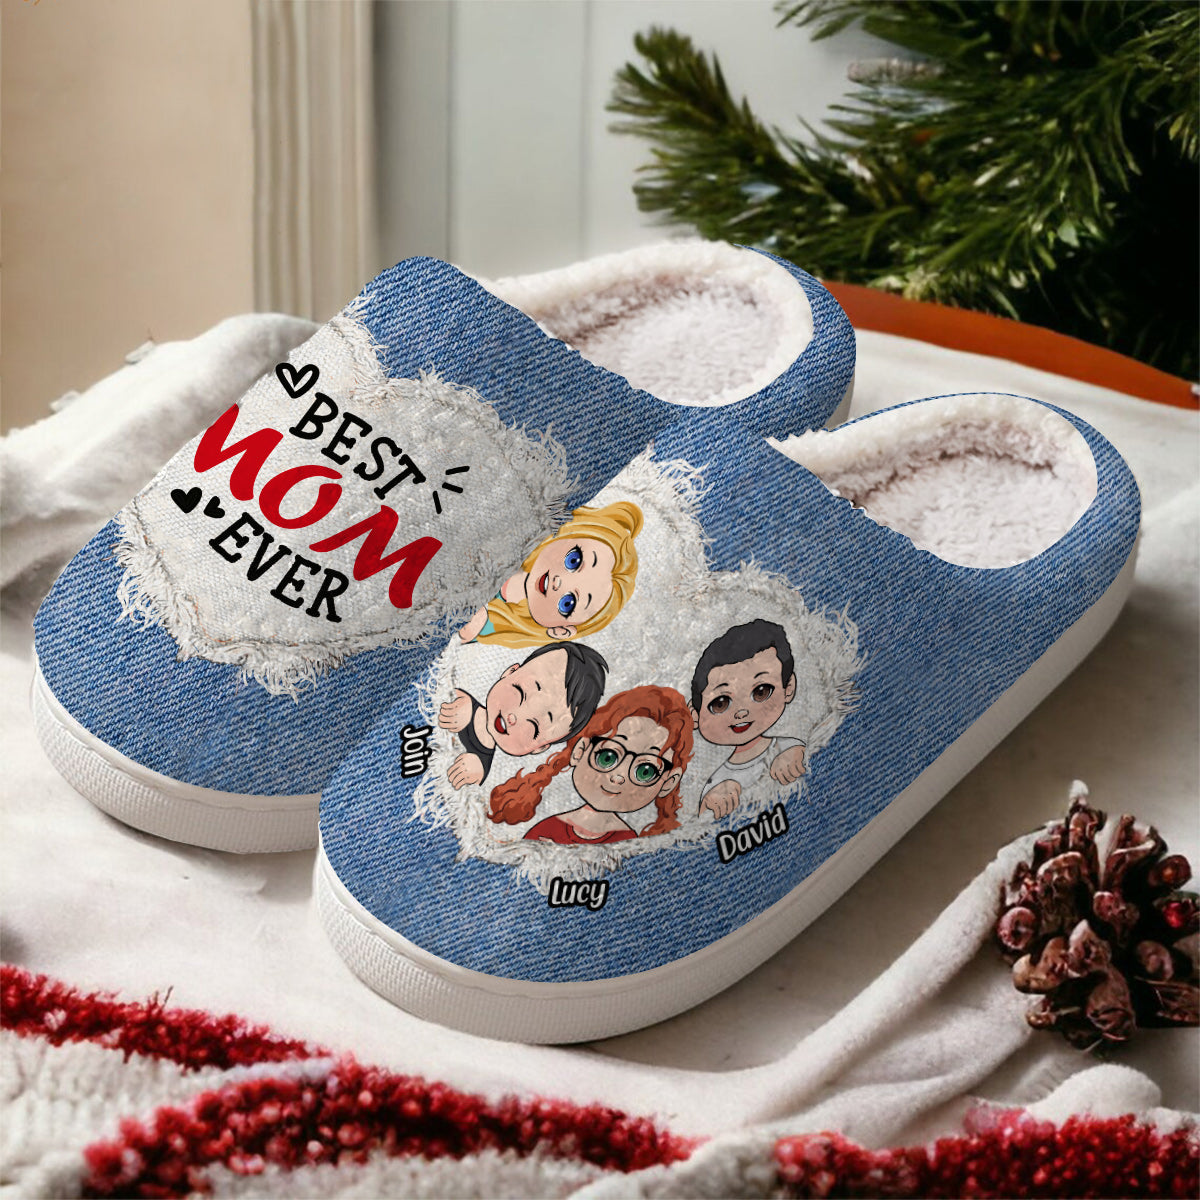 Best Mom Ever - Personalized Mother Slippers